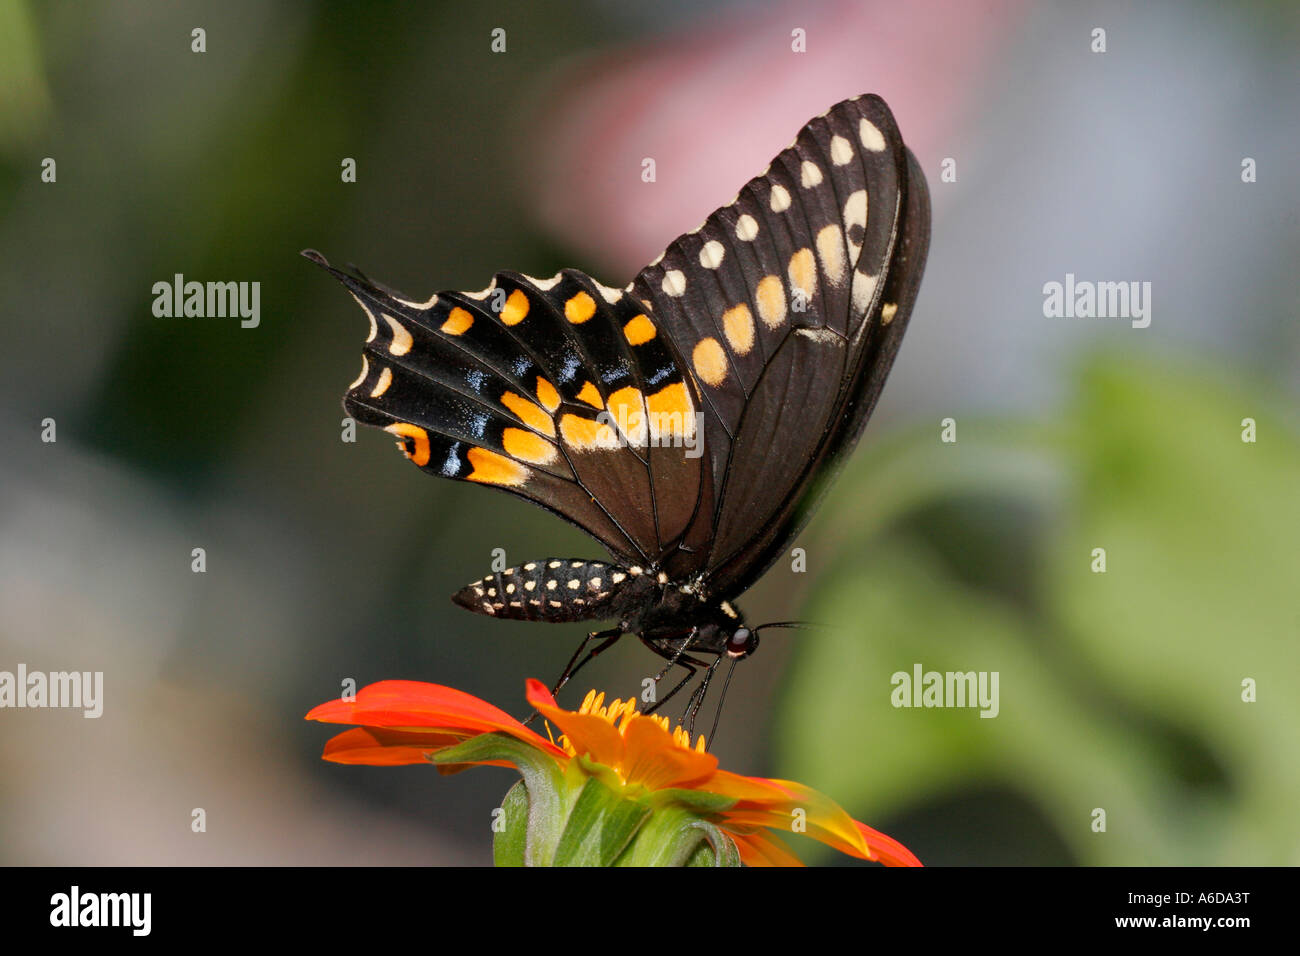 Close-up of a Black Swallowtail Butterfly on a flower pollinating (Papilio polyxenes) Stock Photo